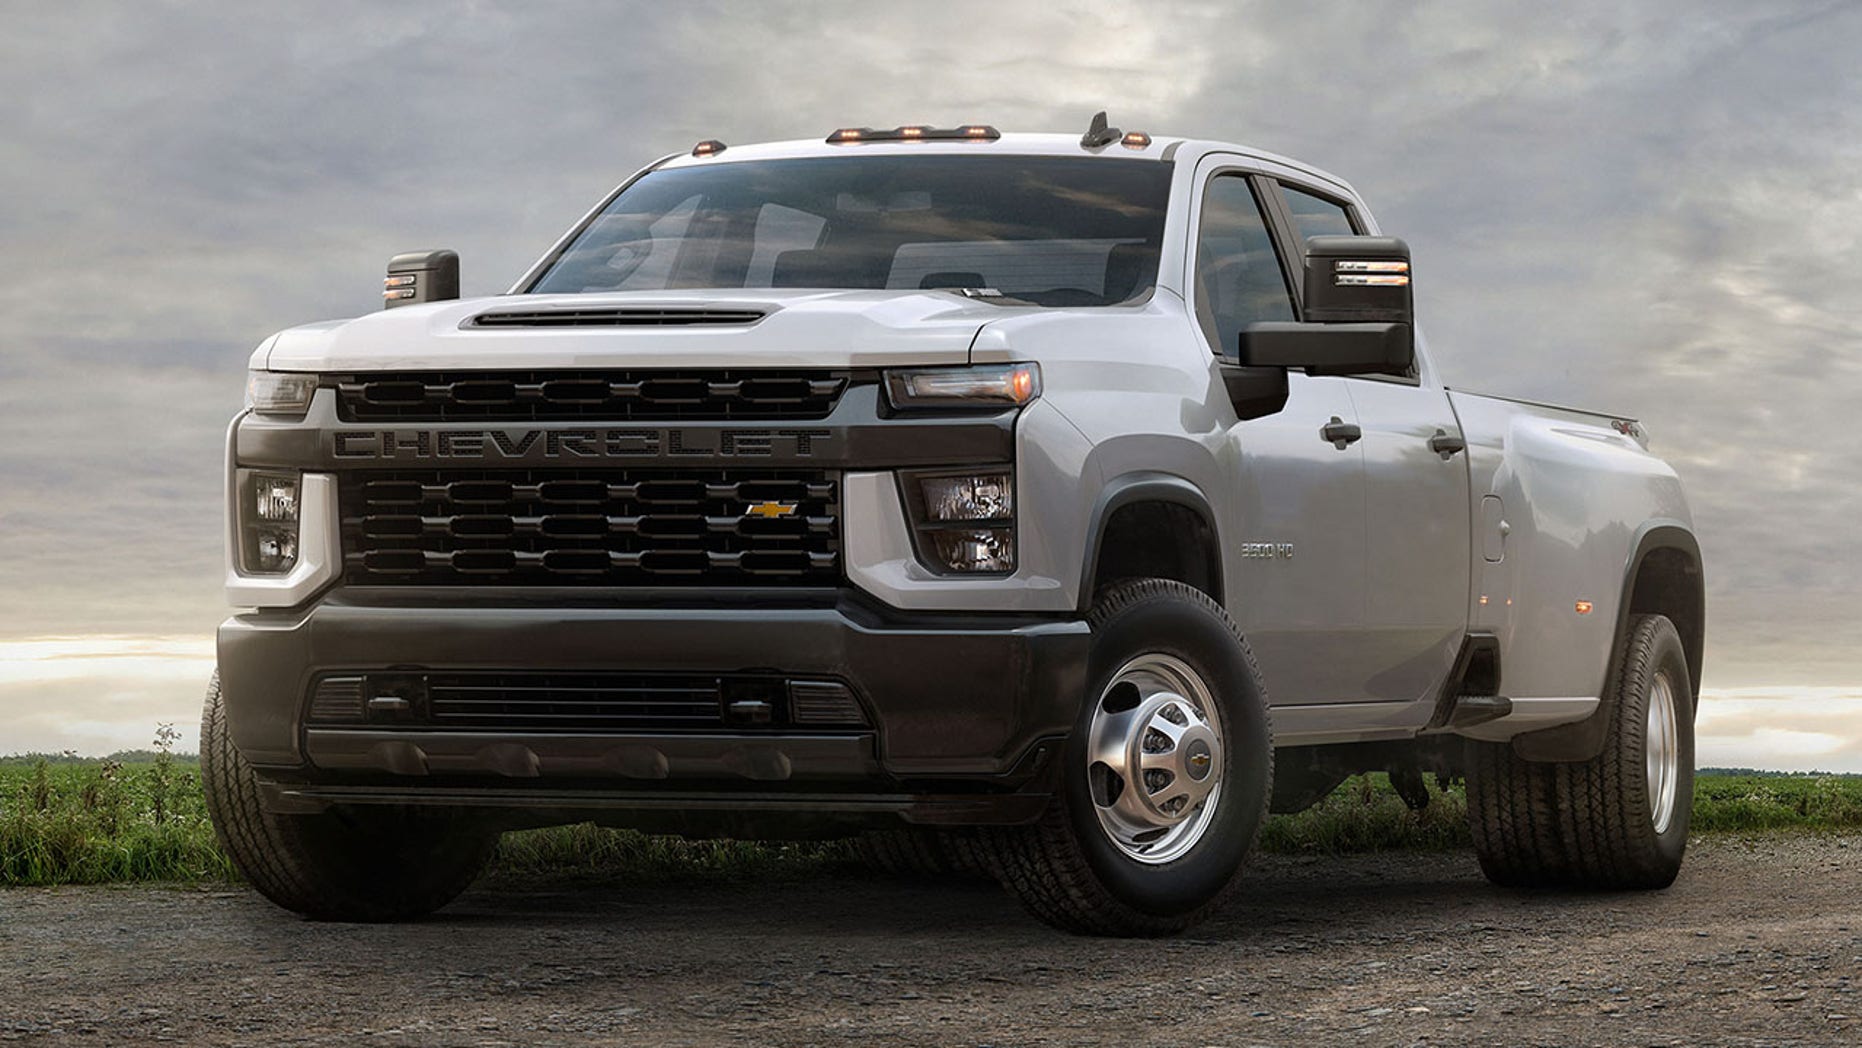 The 2020 Chevrolet Silverado Hd Is The Strongest Pickup In Americafor Now Fox News 3497